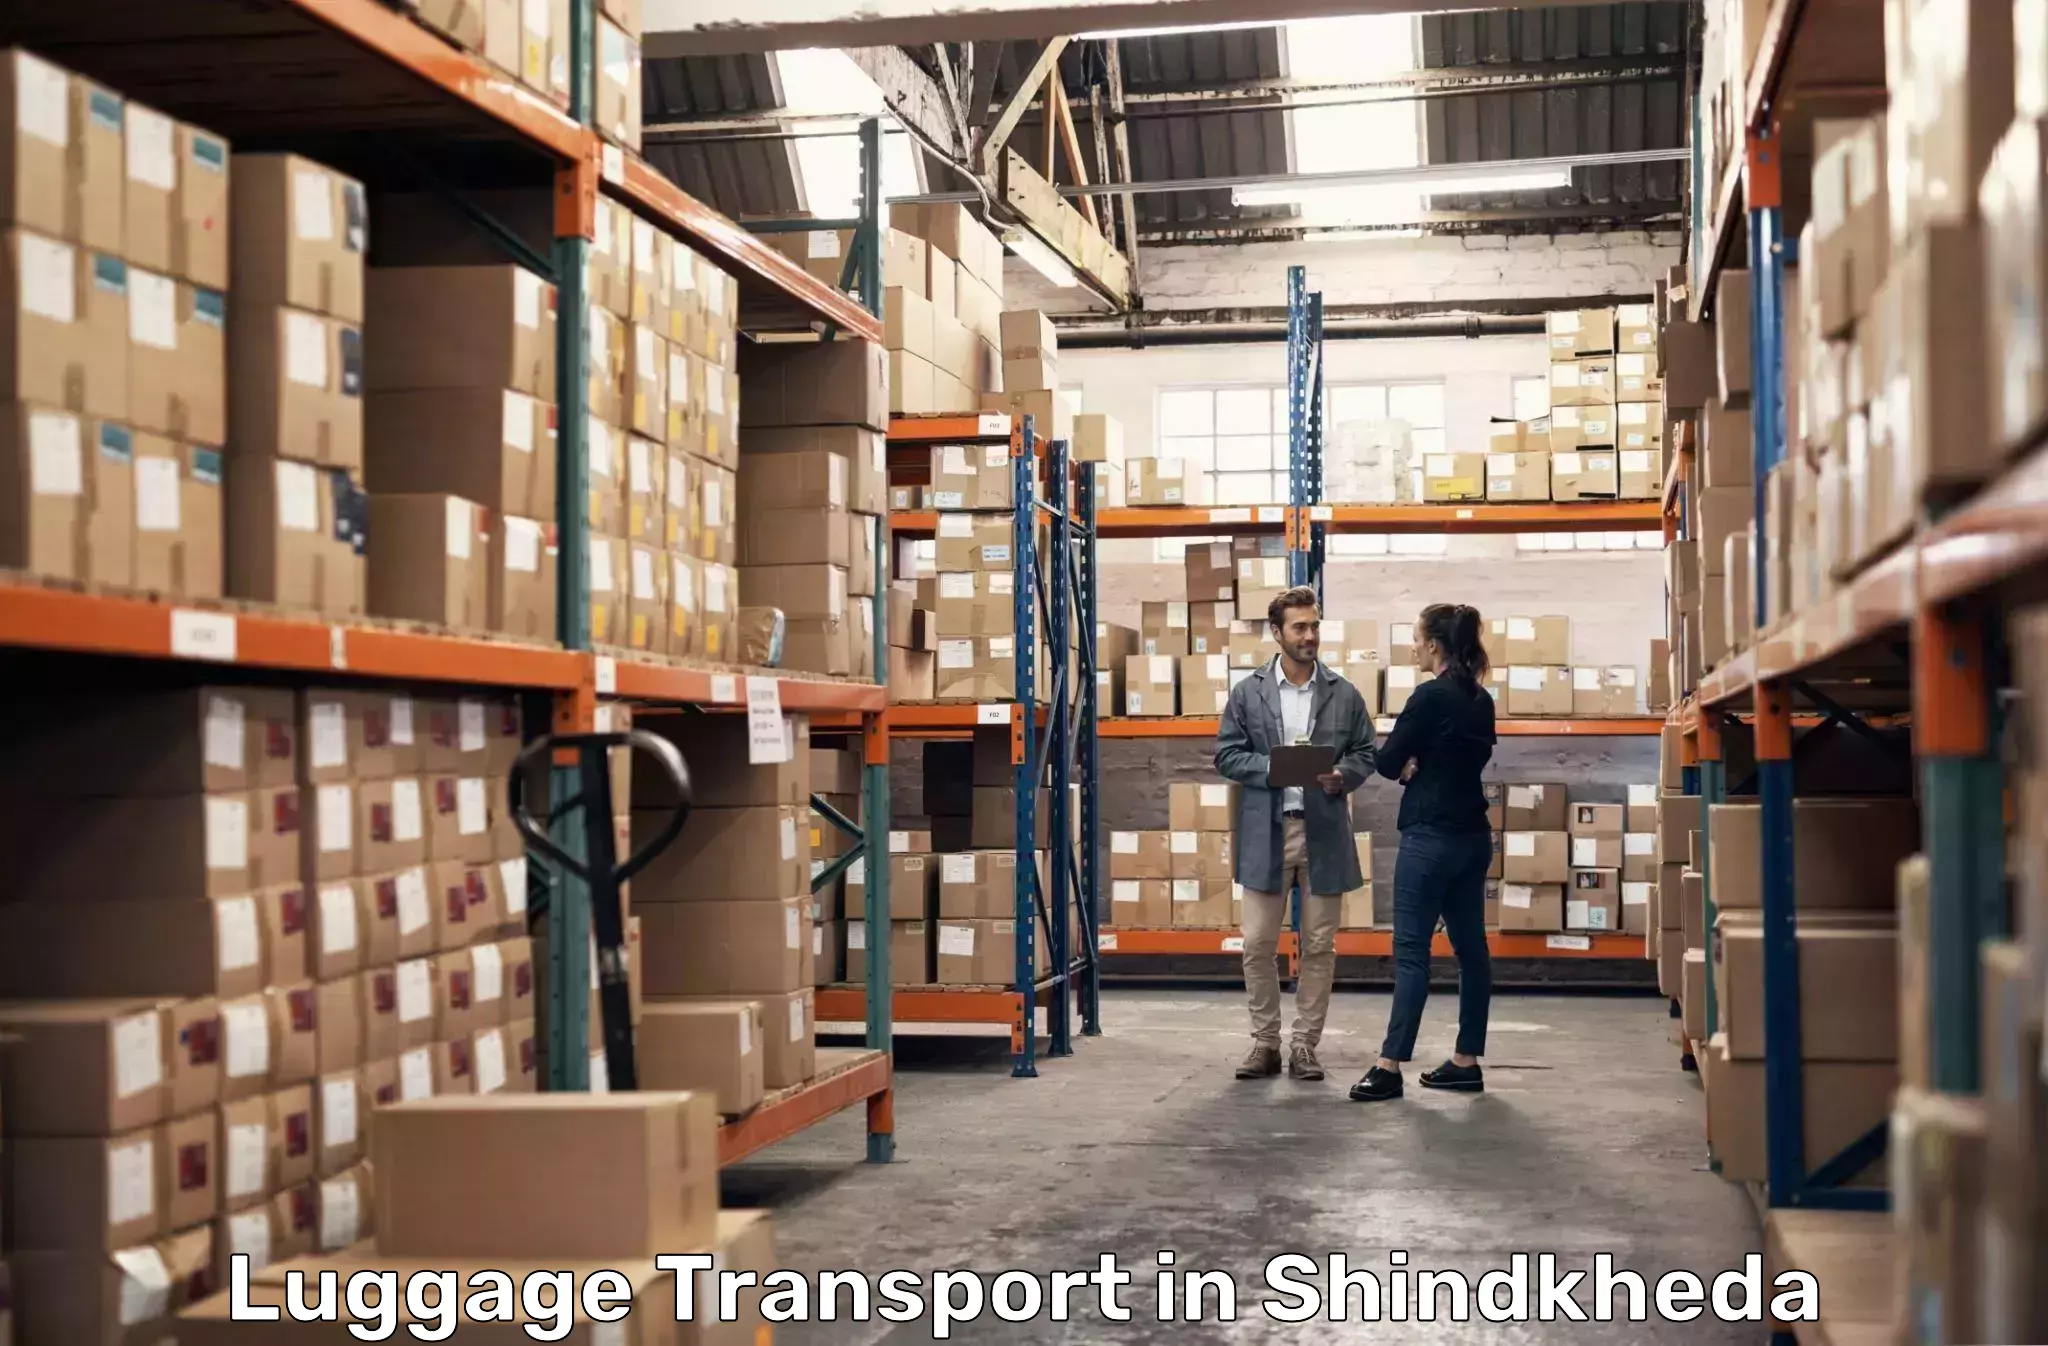 Luggage shipping strategy in Shindkheda